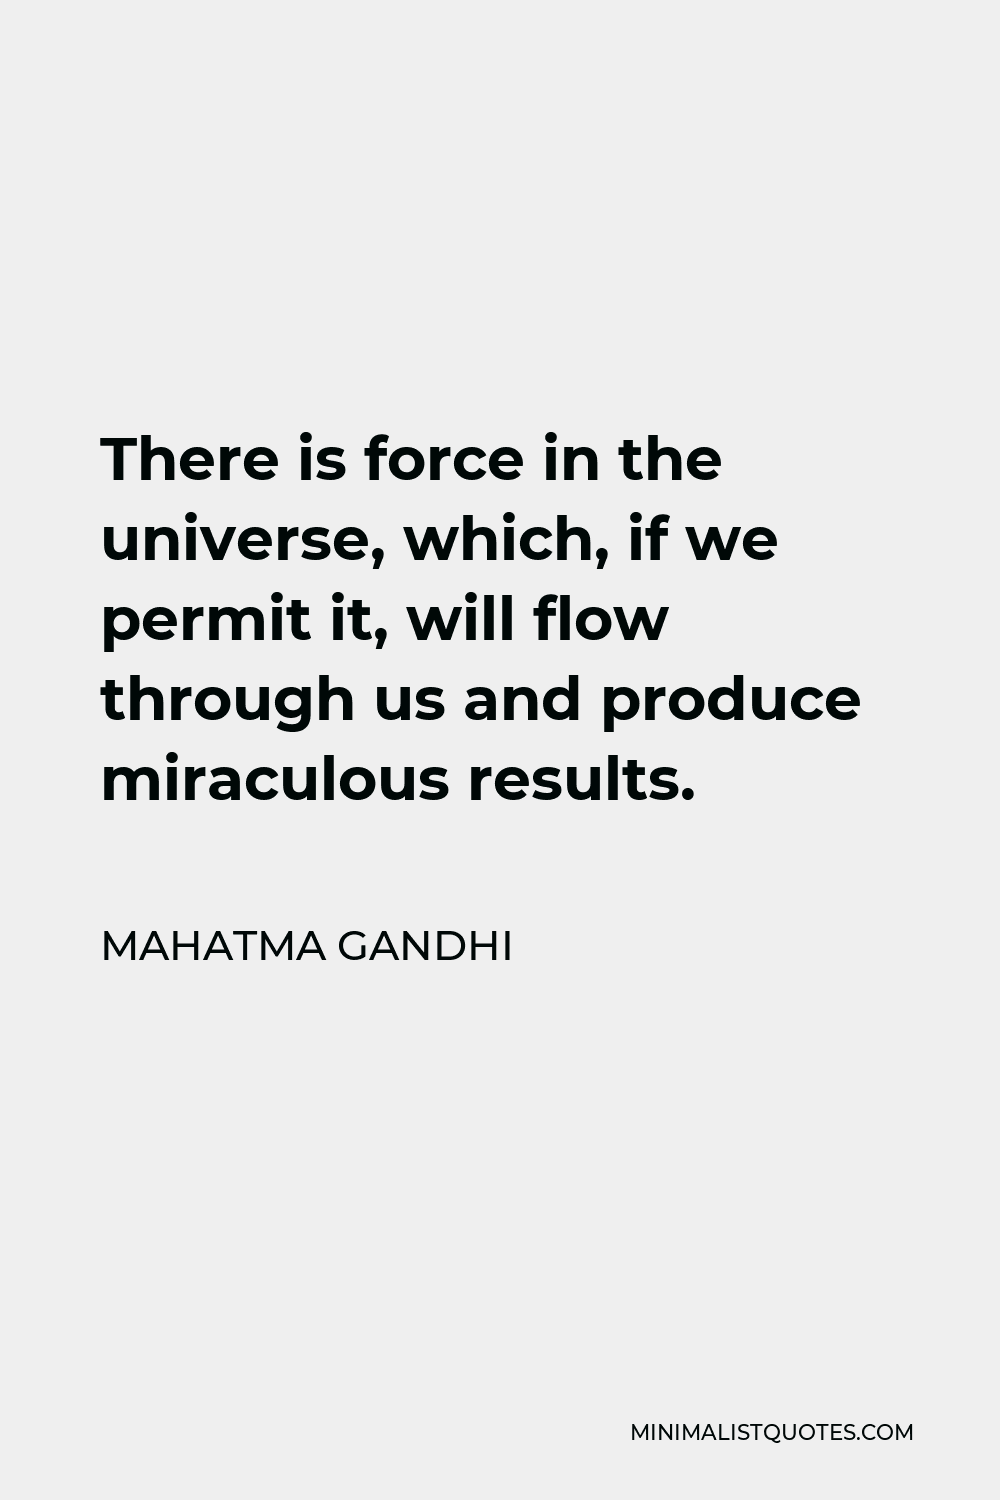 Mahatma Gandhi Quote - There is force in the universe, which, if we permit it, will flow through us and produce miraculous results.